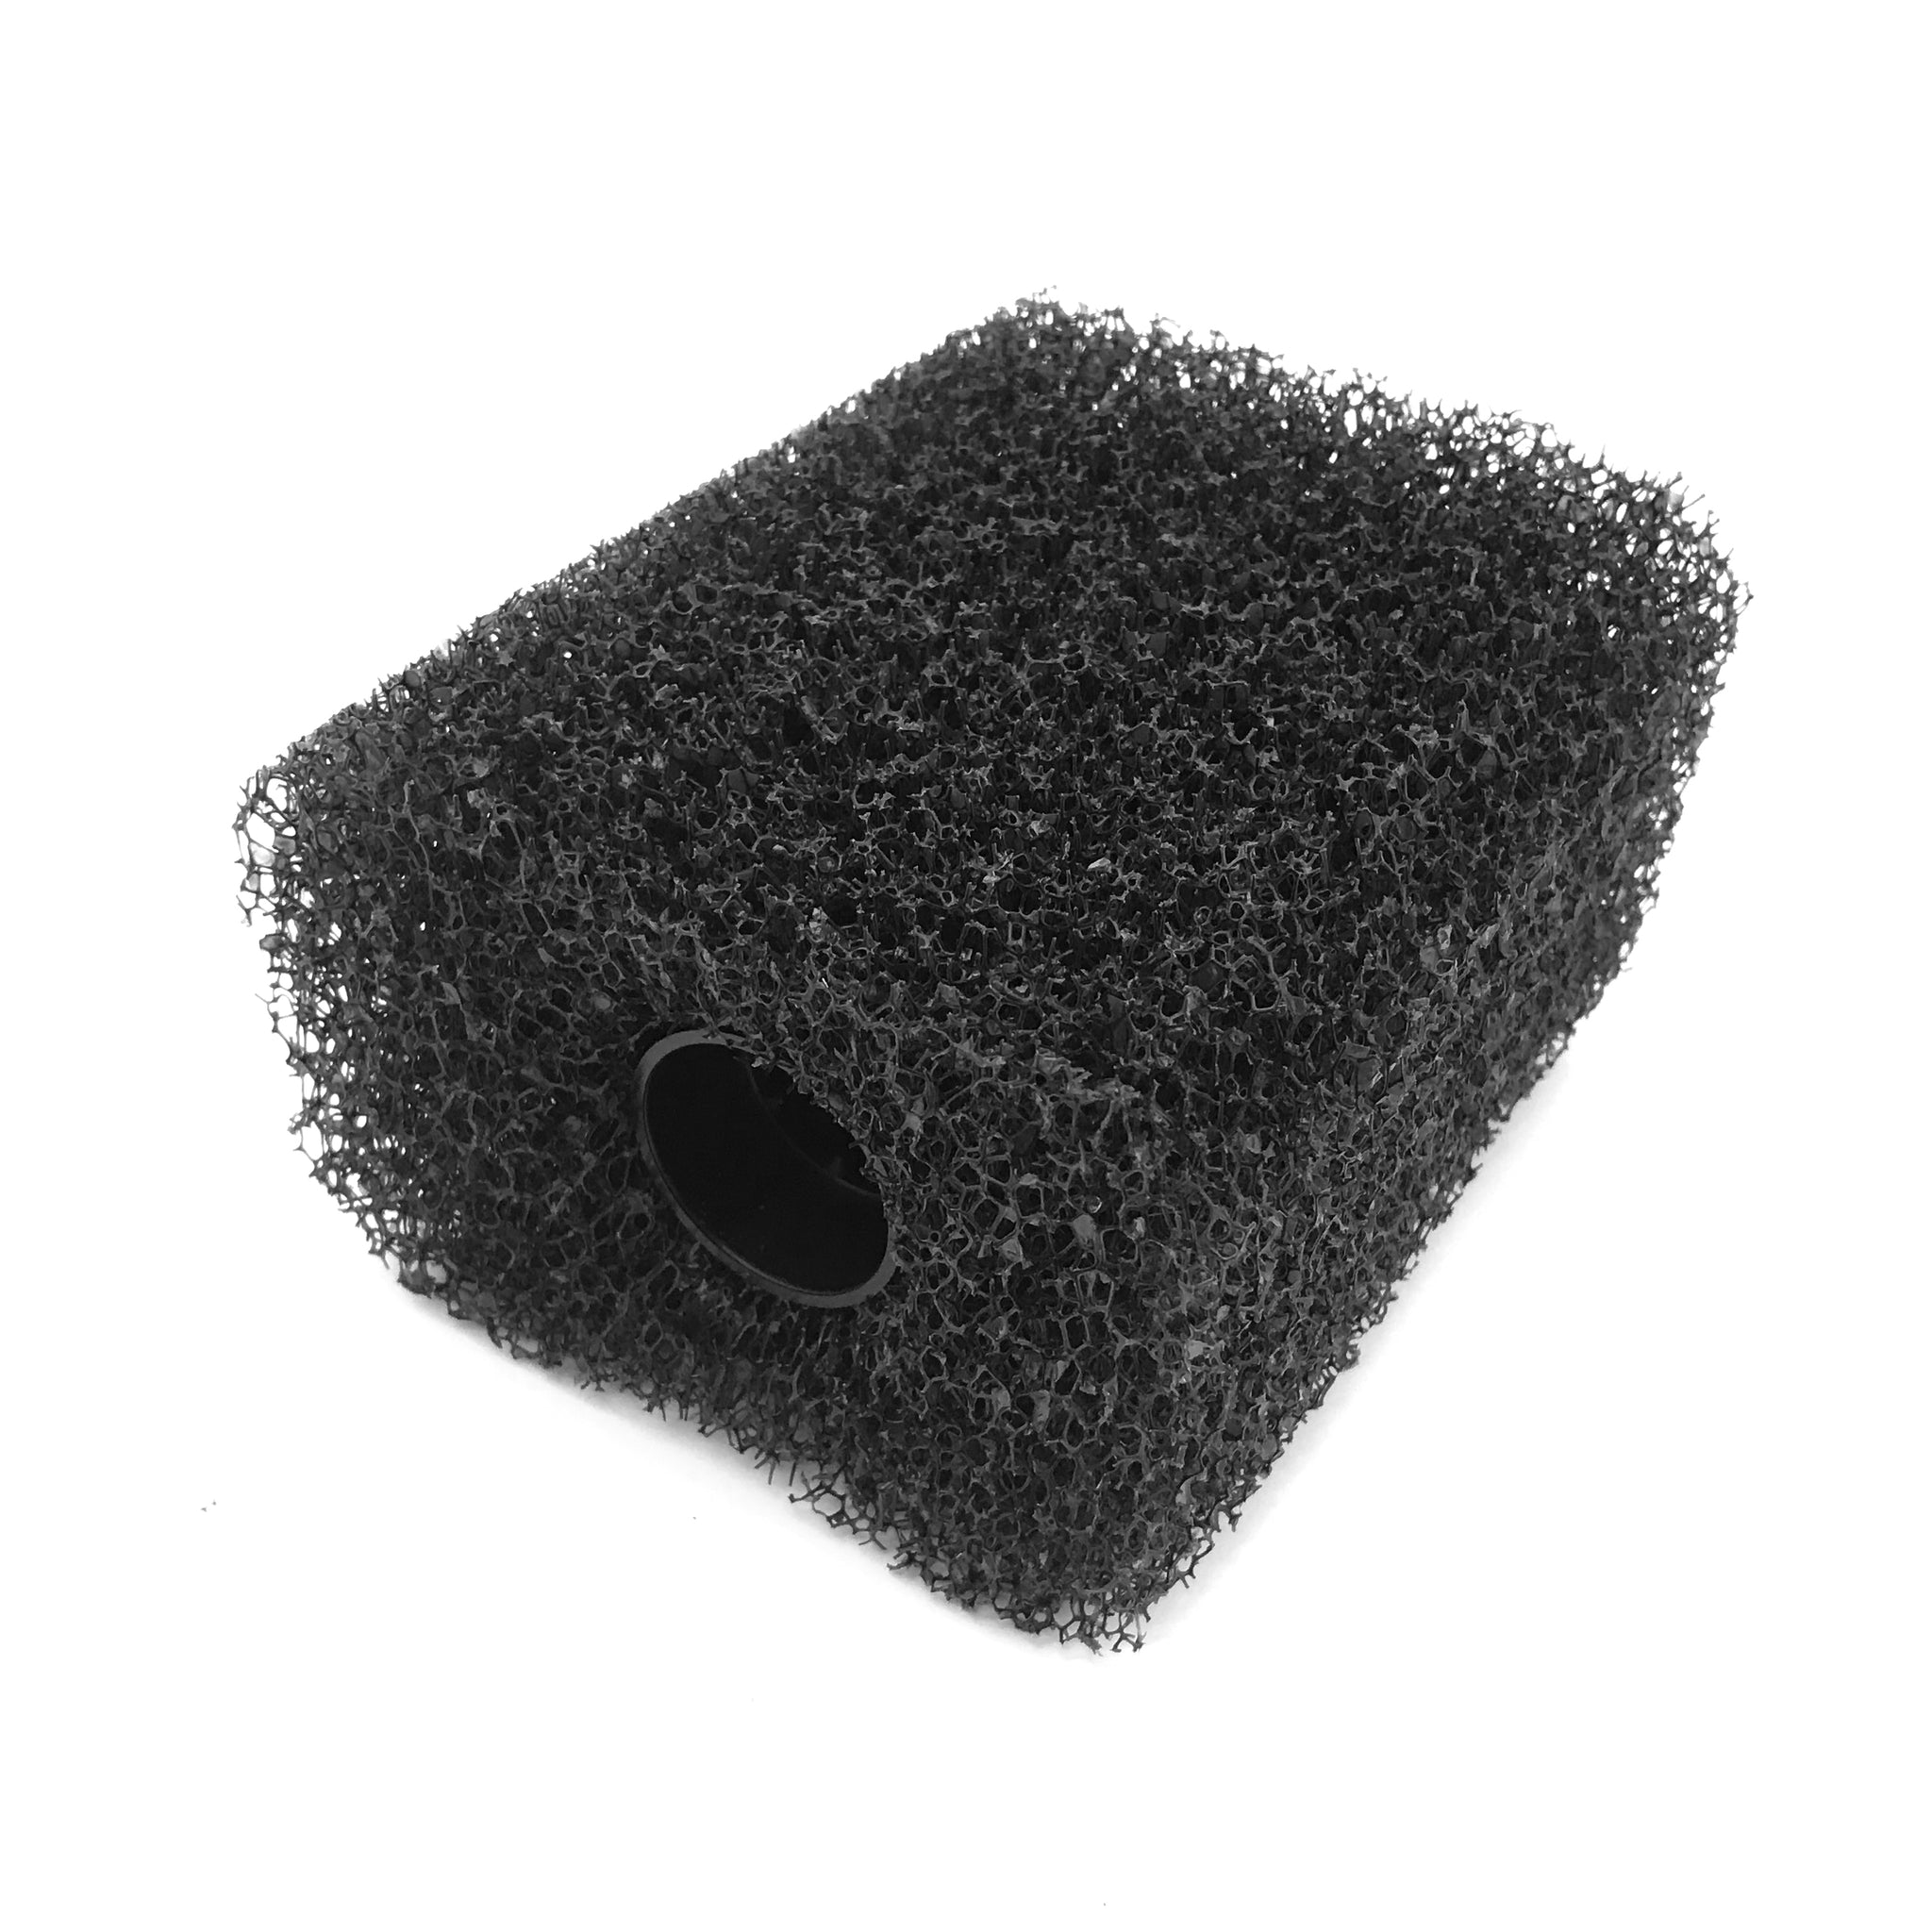 Foam Pre-Filter For Mag-Drive 950 GPH, 1200 GPH and 1800 GPH Pumps